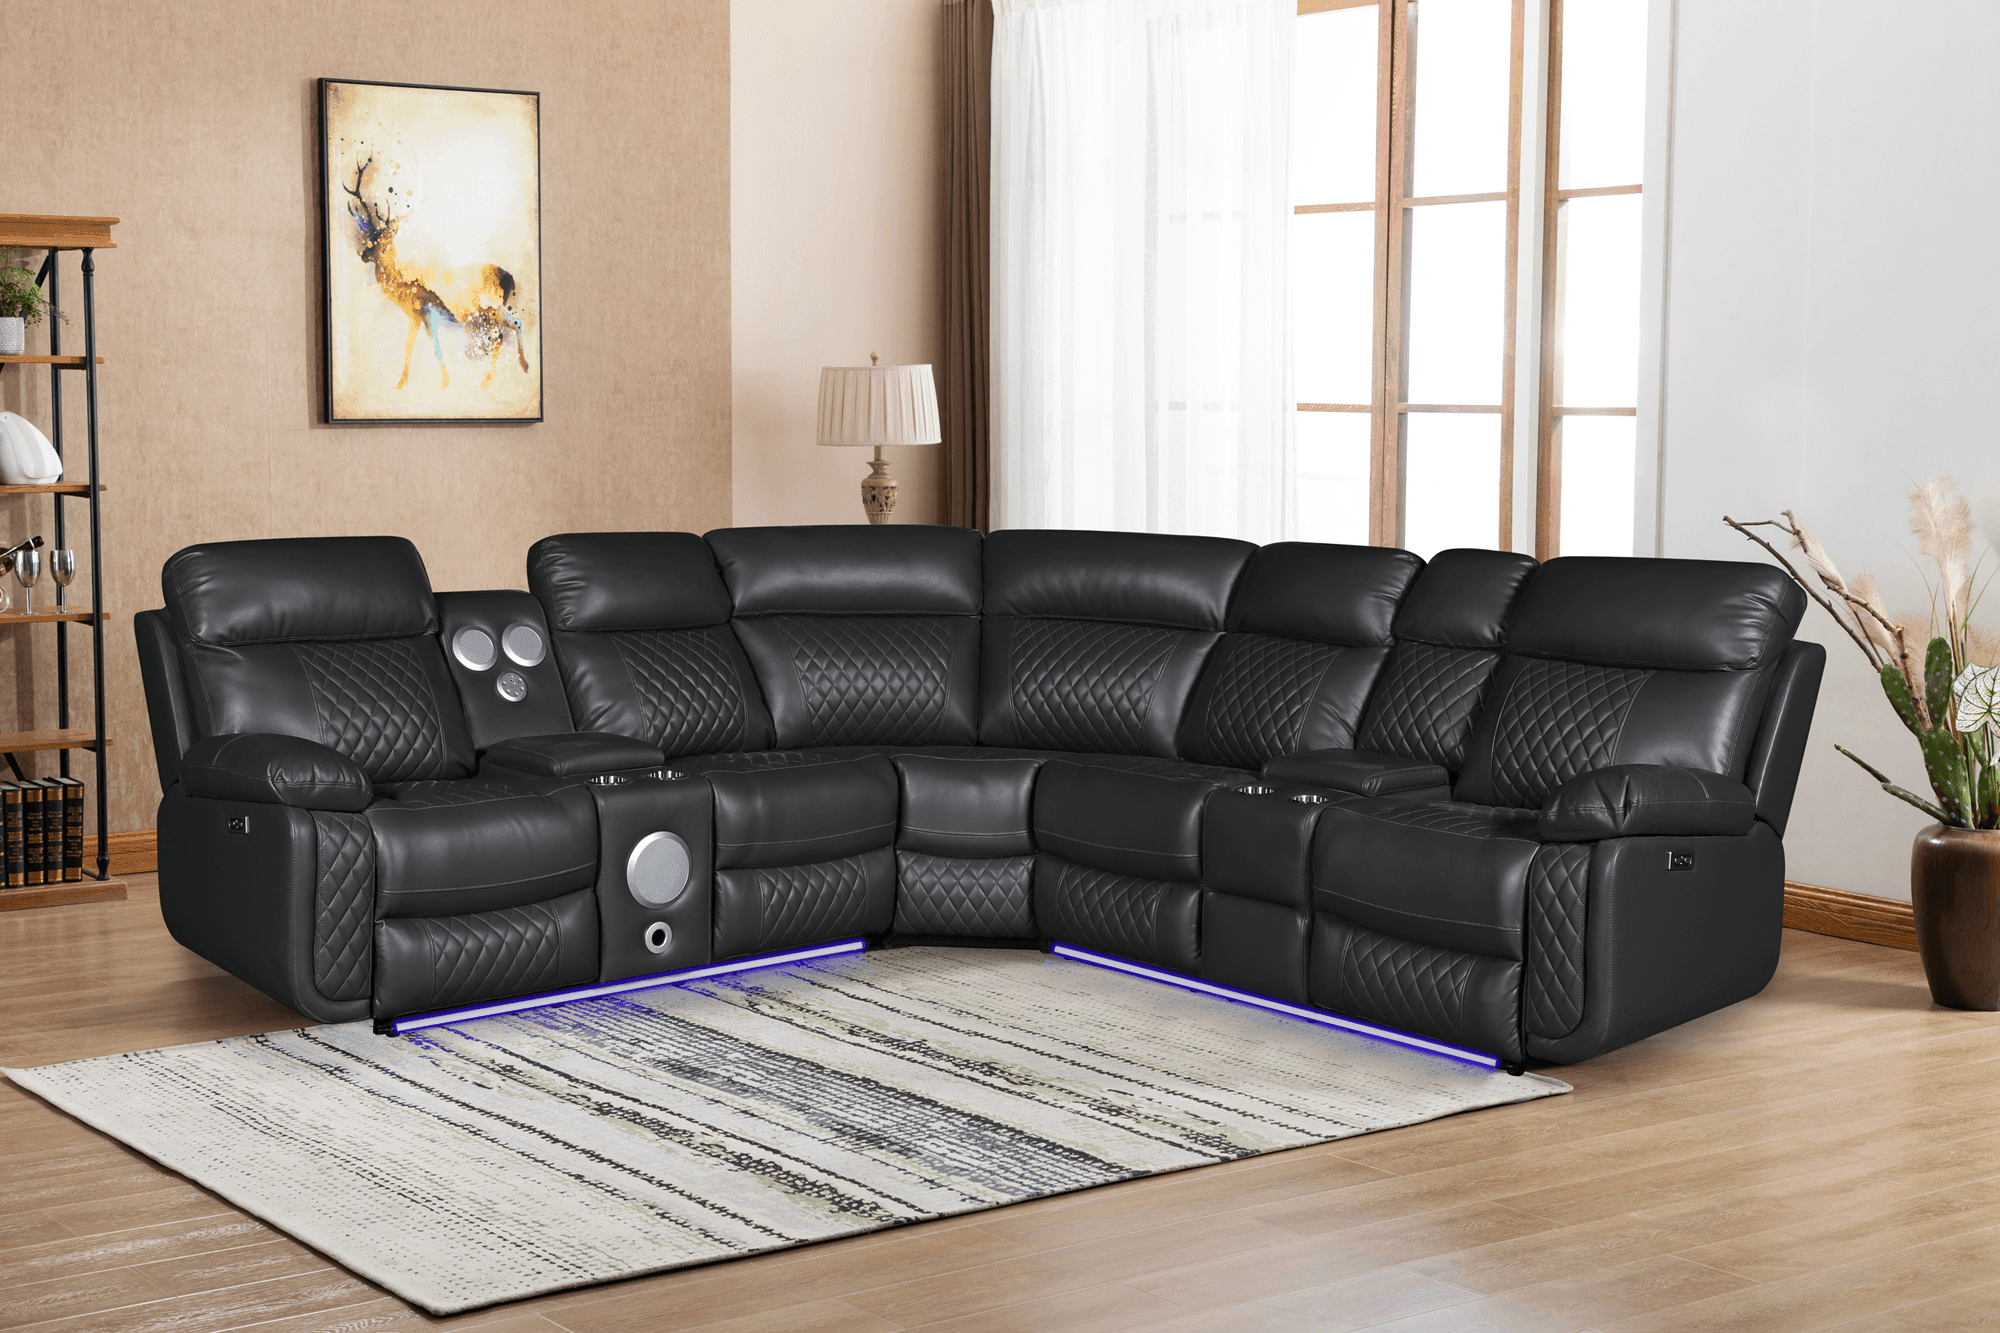 Bunbury recliner lounge with plush Air Leather upholstery, featuring corner recliners and a built-in Bluetooth speaker system.